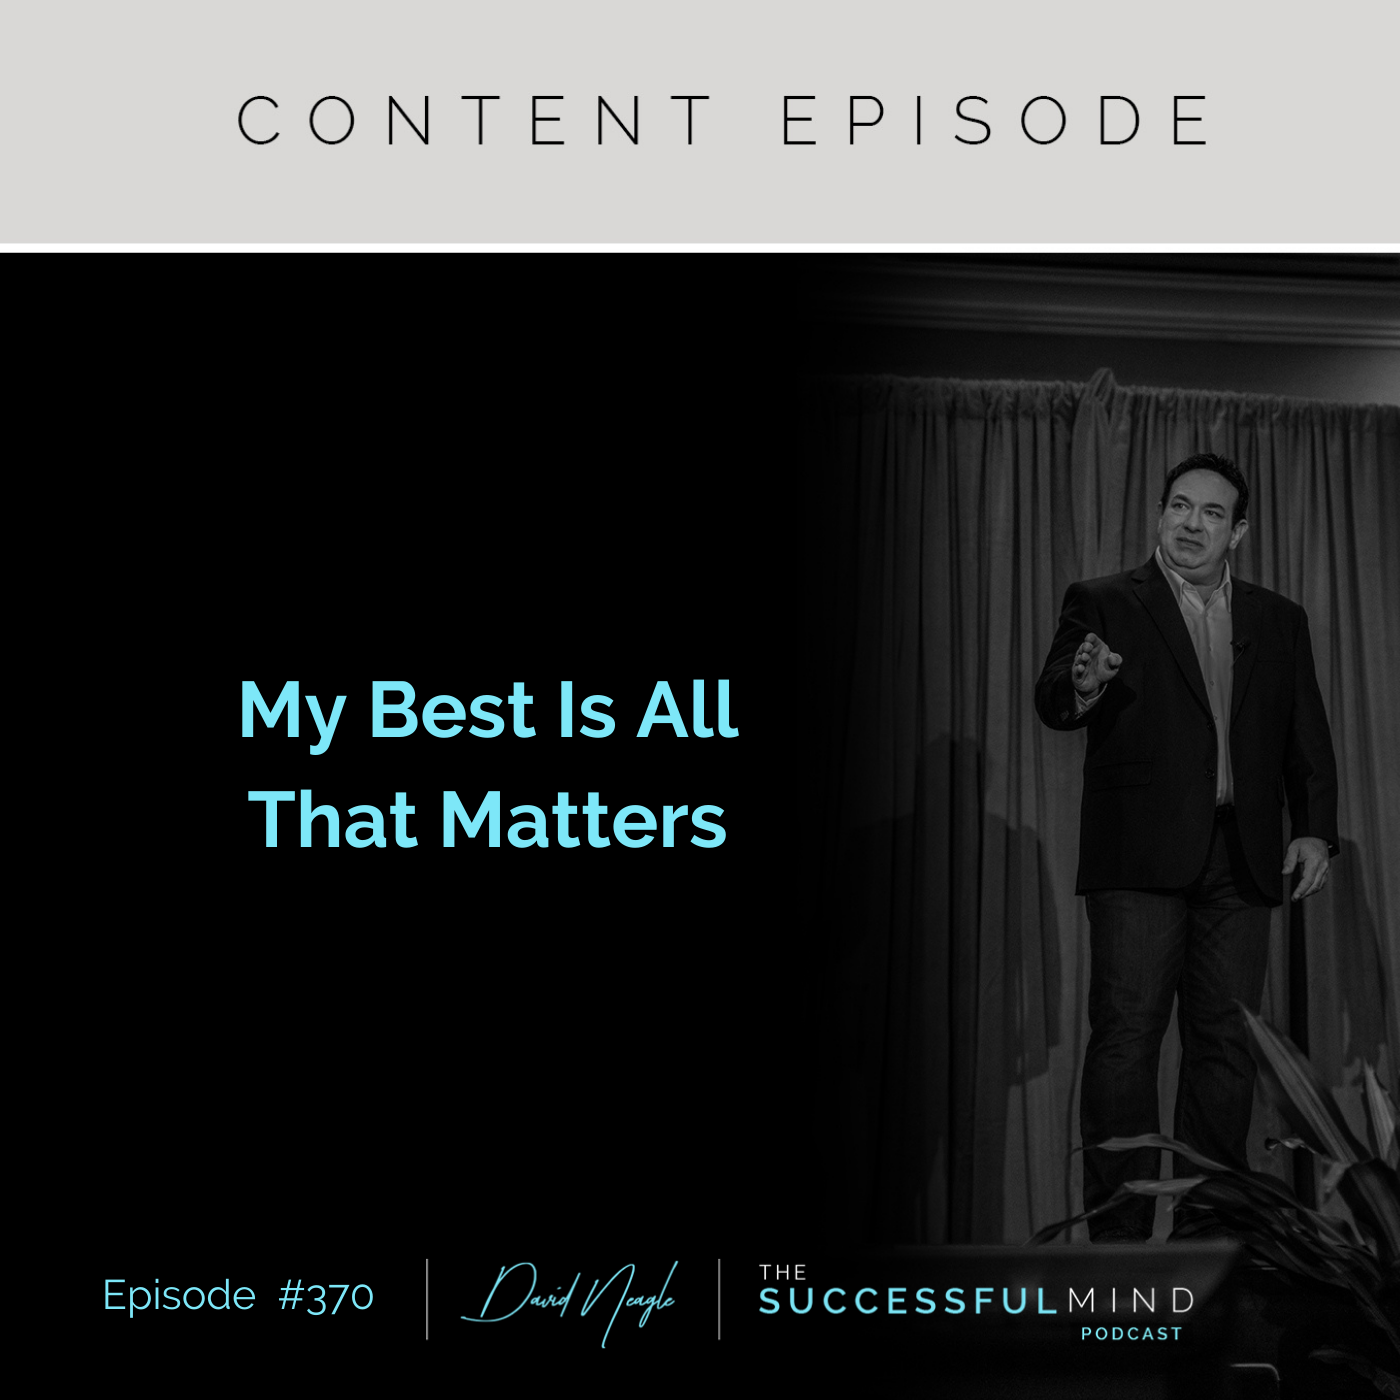 The Successful Mind Podcast - Episode 370 - My Best Is All That Matters